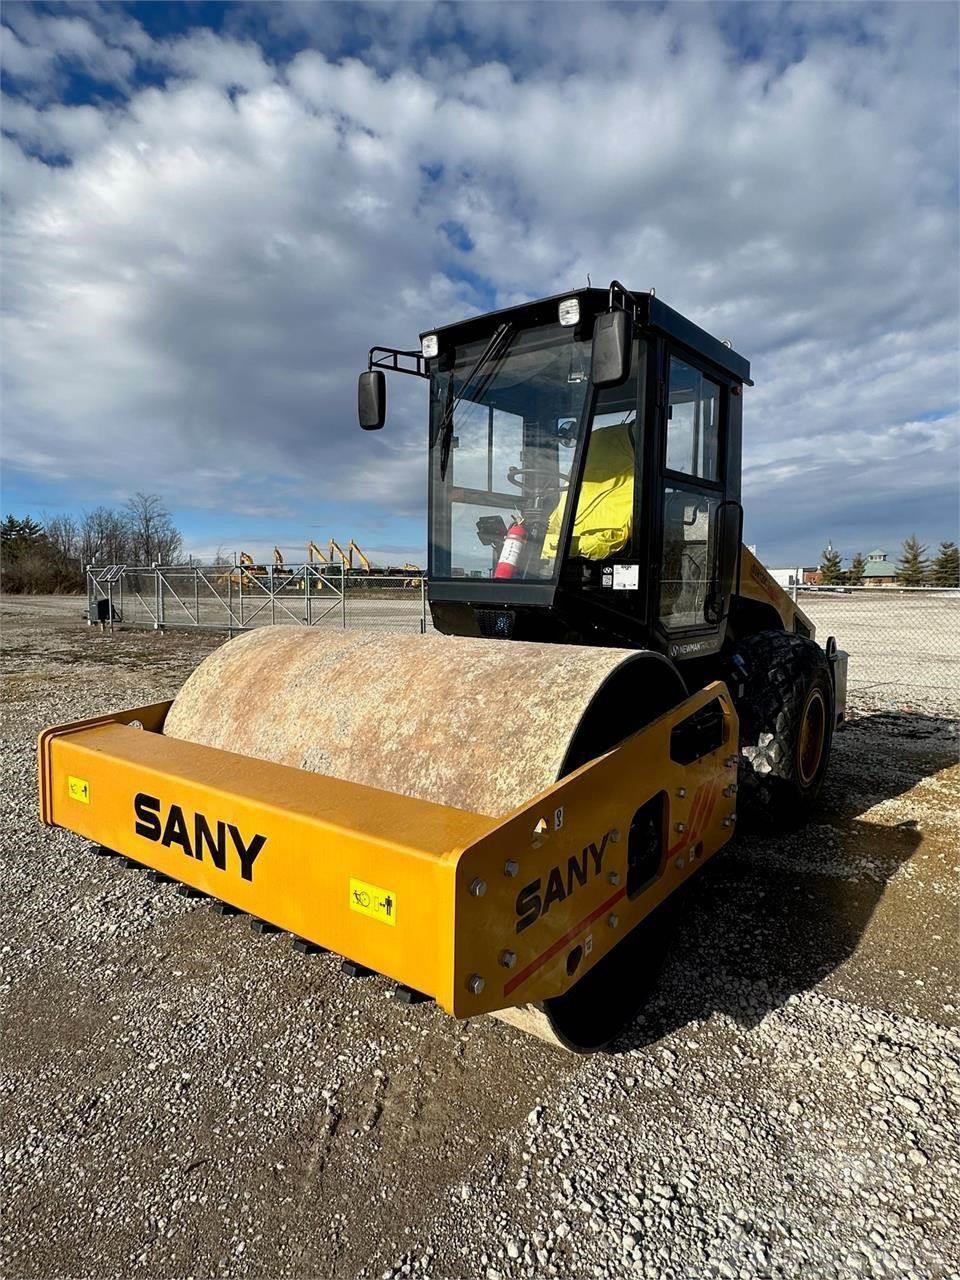 Sany SSR120C-8 Twin drum rollers